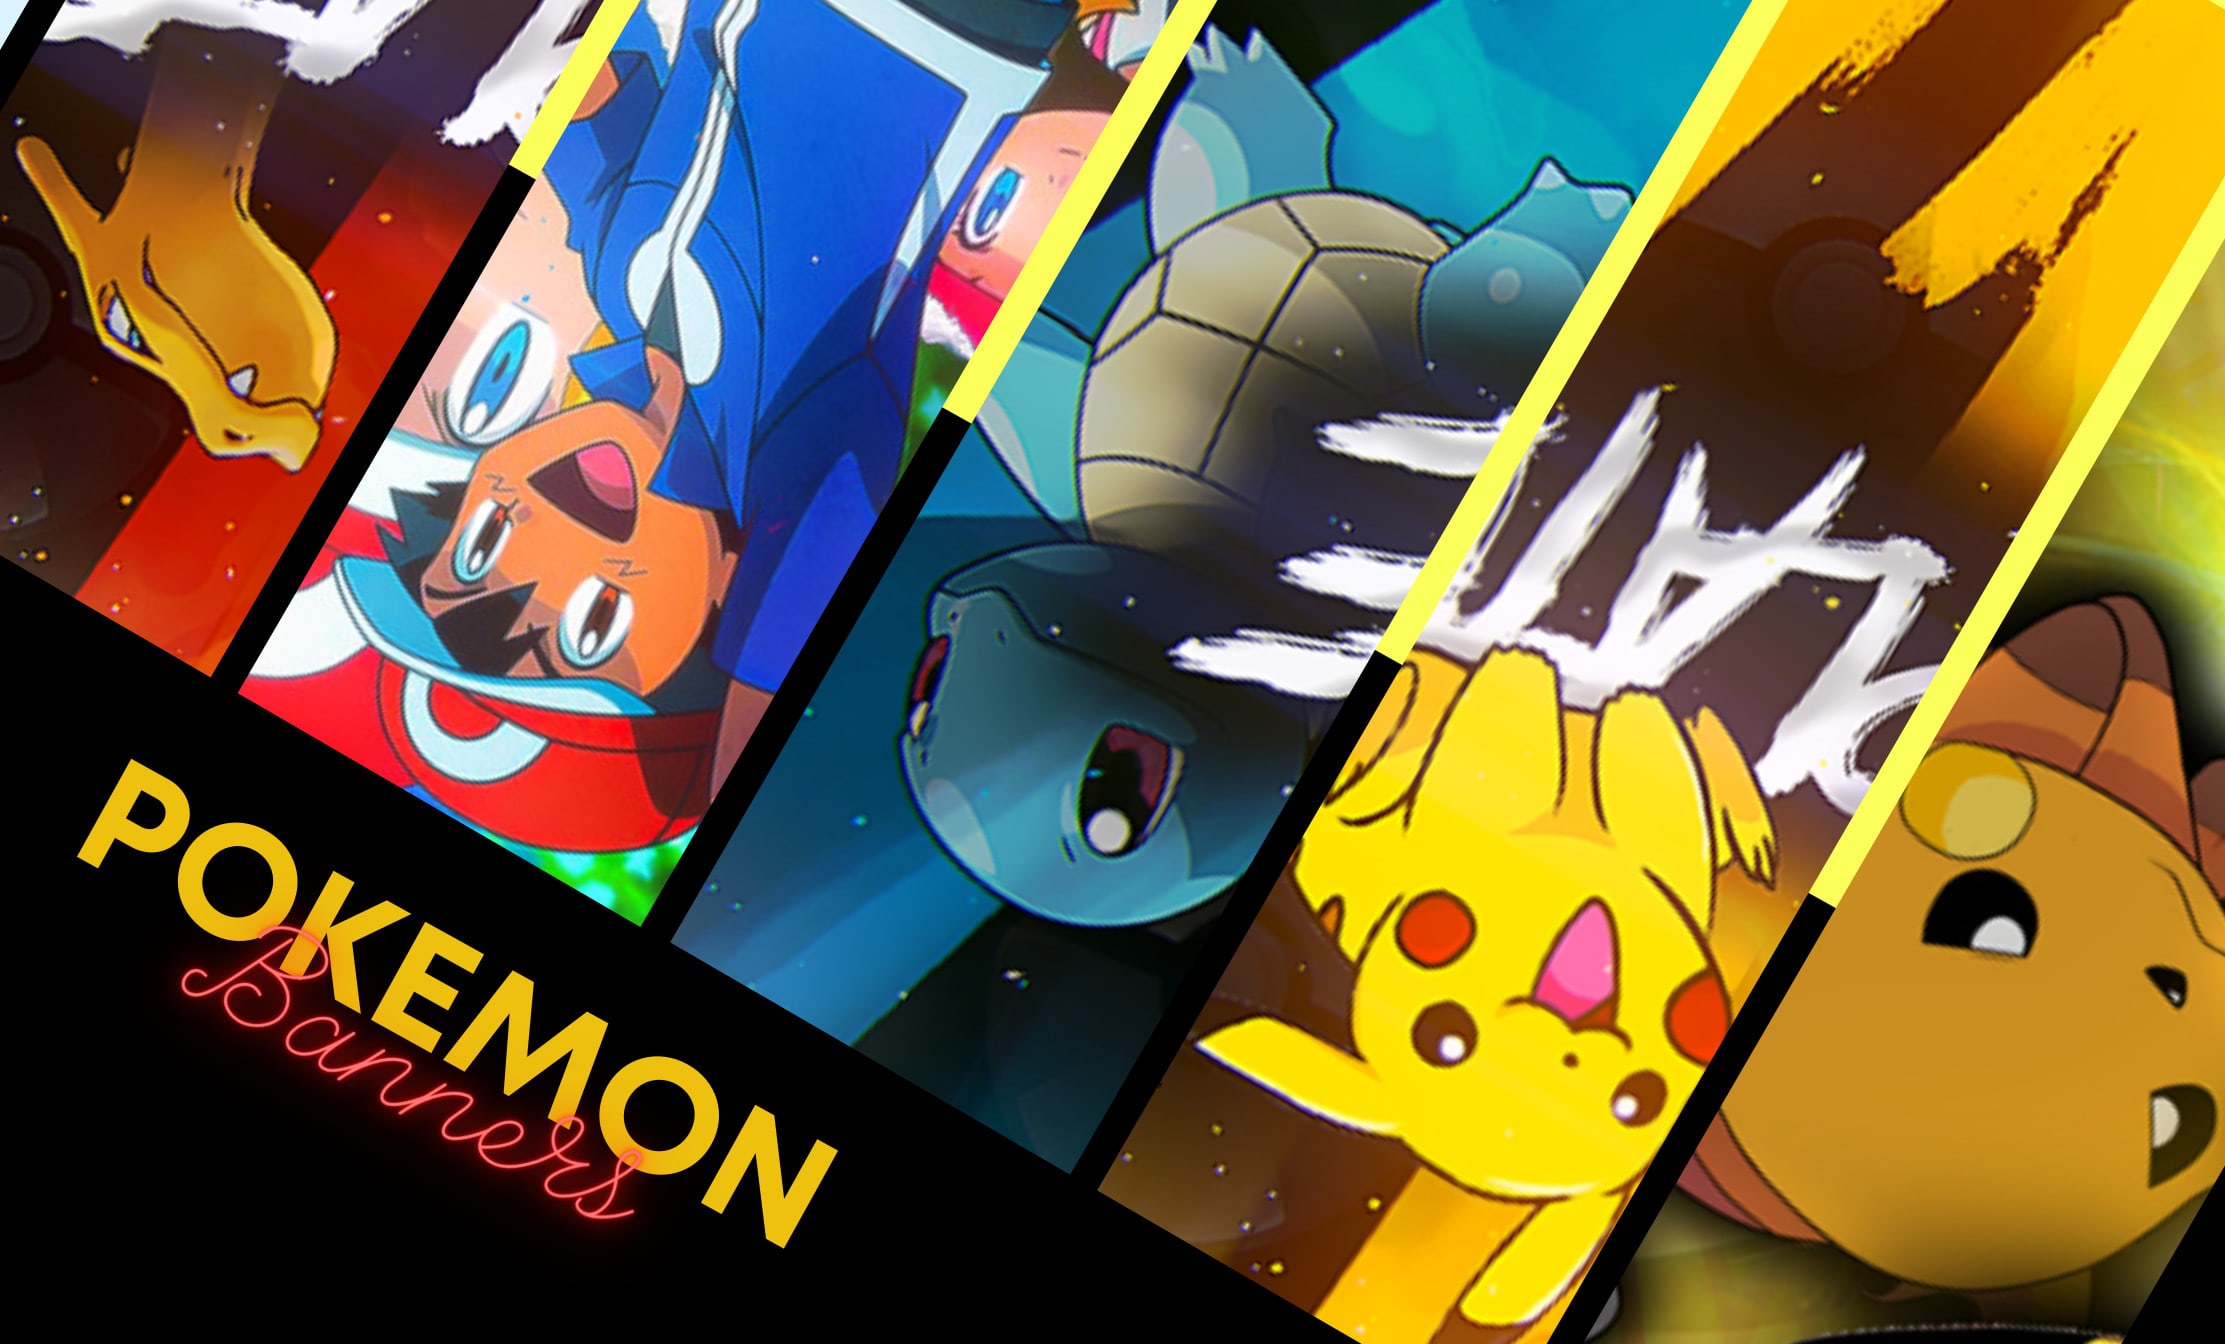 Pokemon The epic game banner